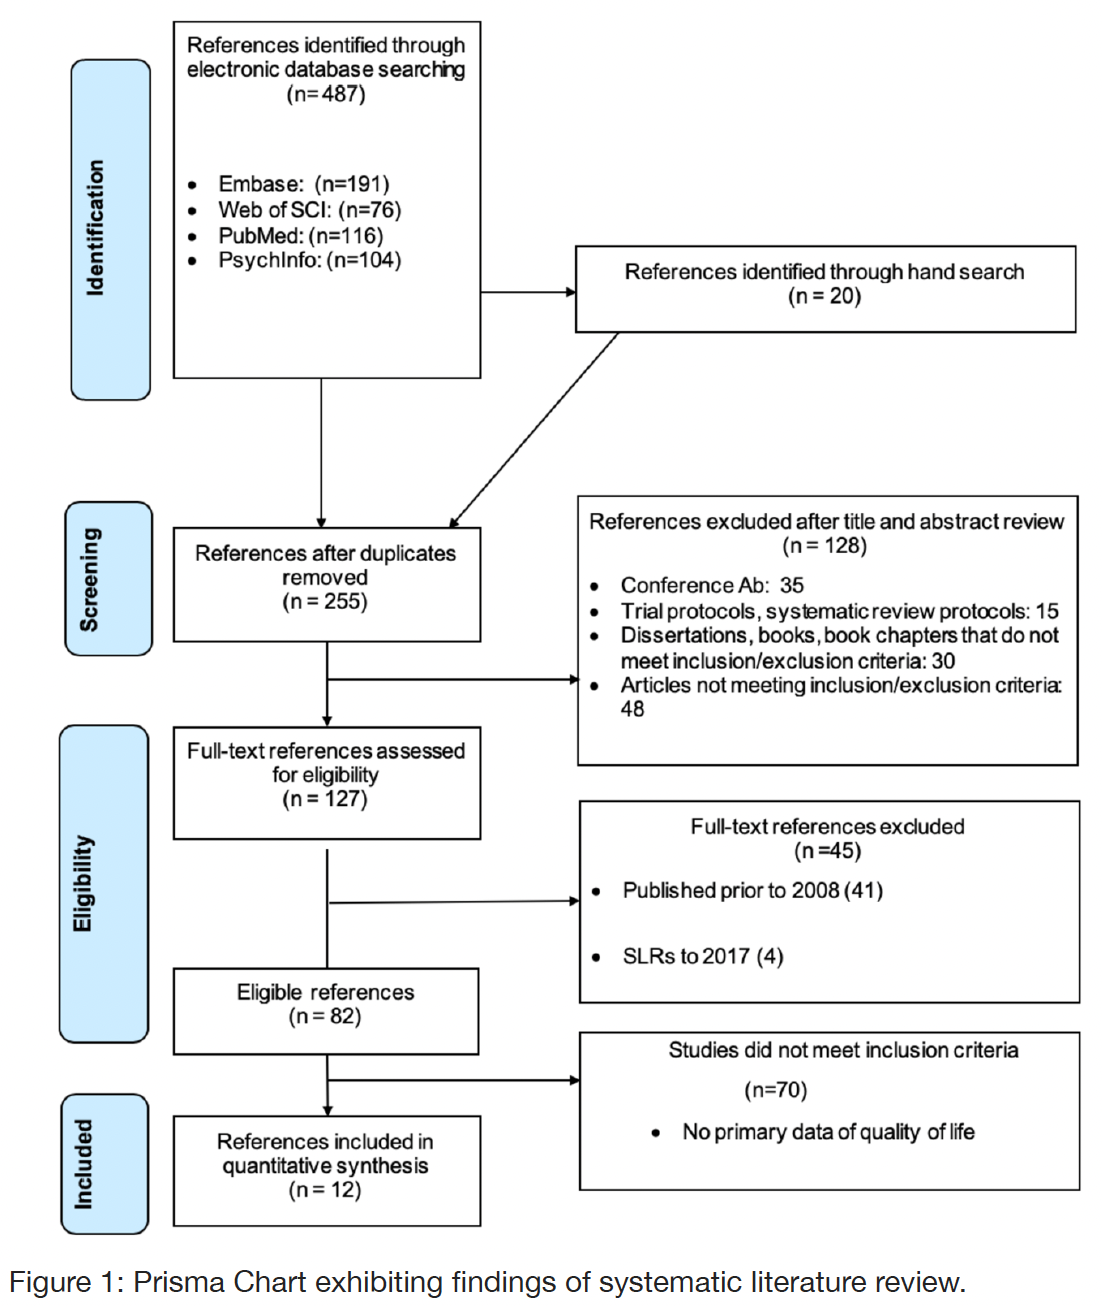 Figure 1: Prisma Chart exhibiting findings of systematic literature review